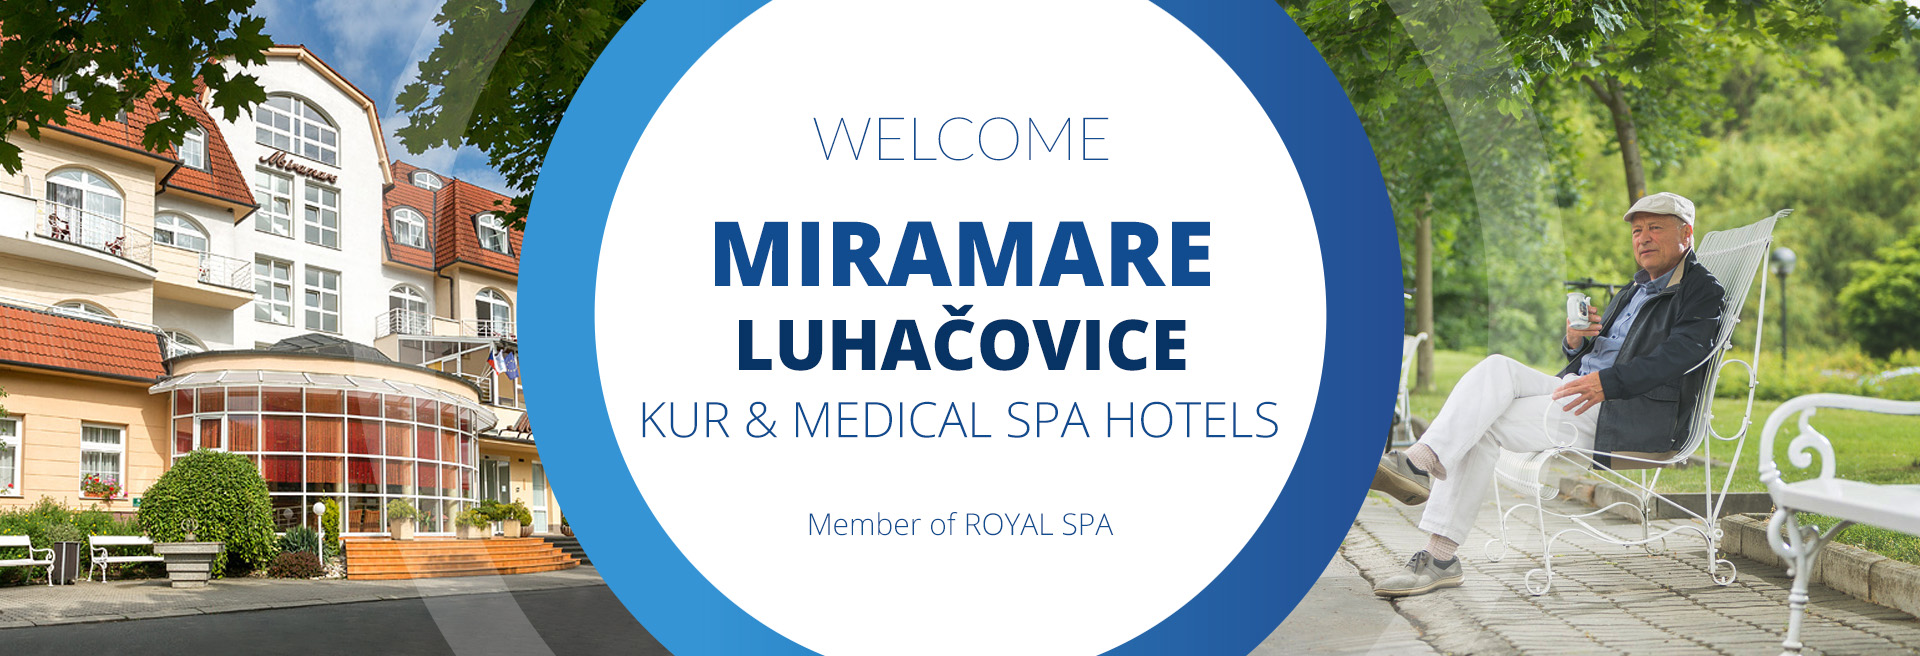 Offer of accommodation in Luhačovice Spa MIRAMARE